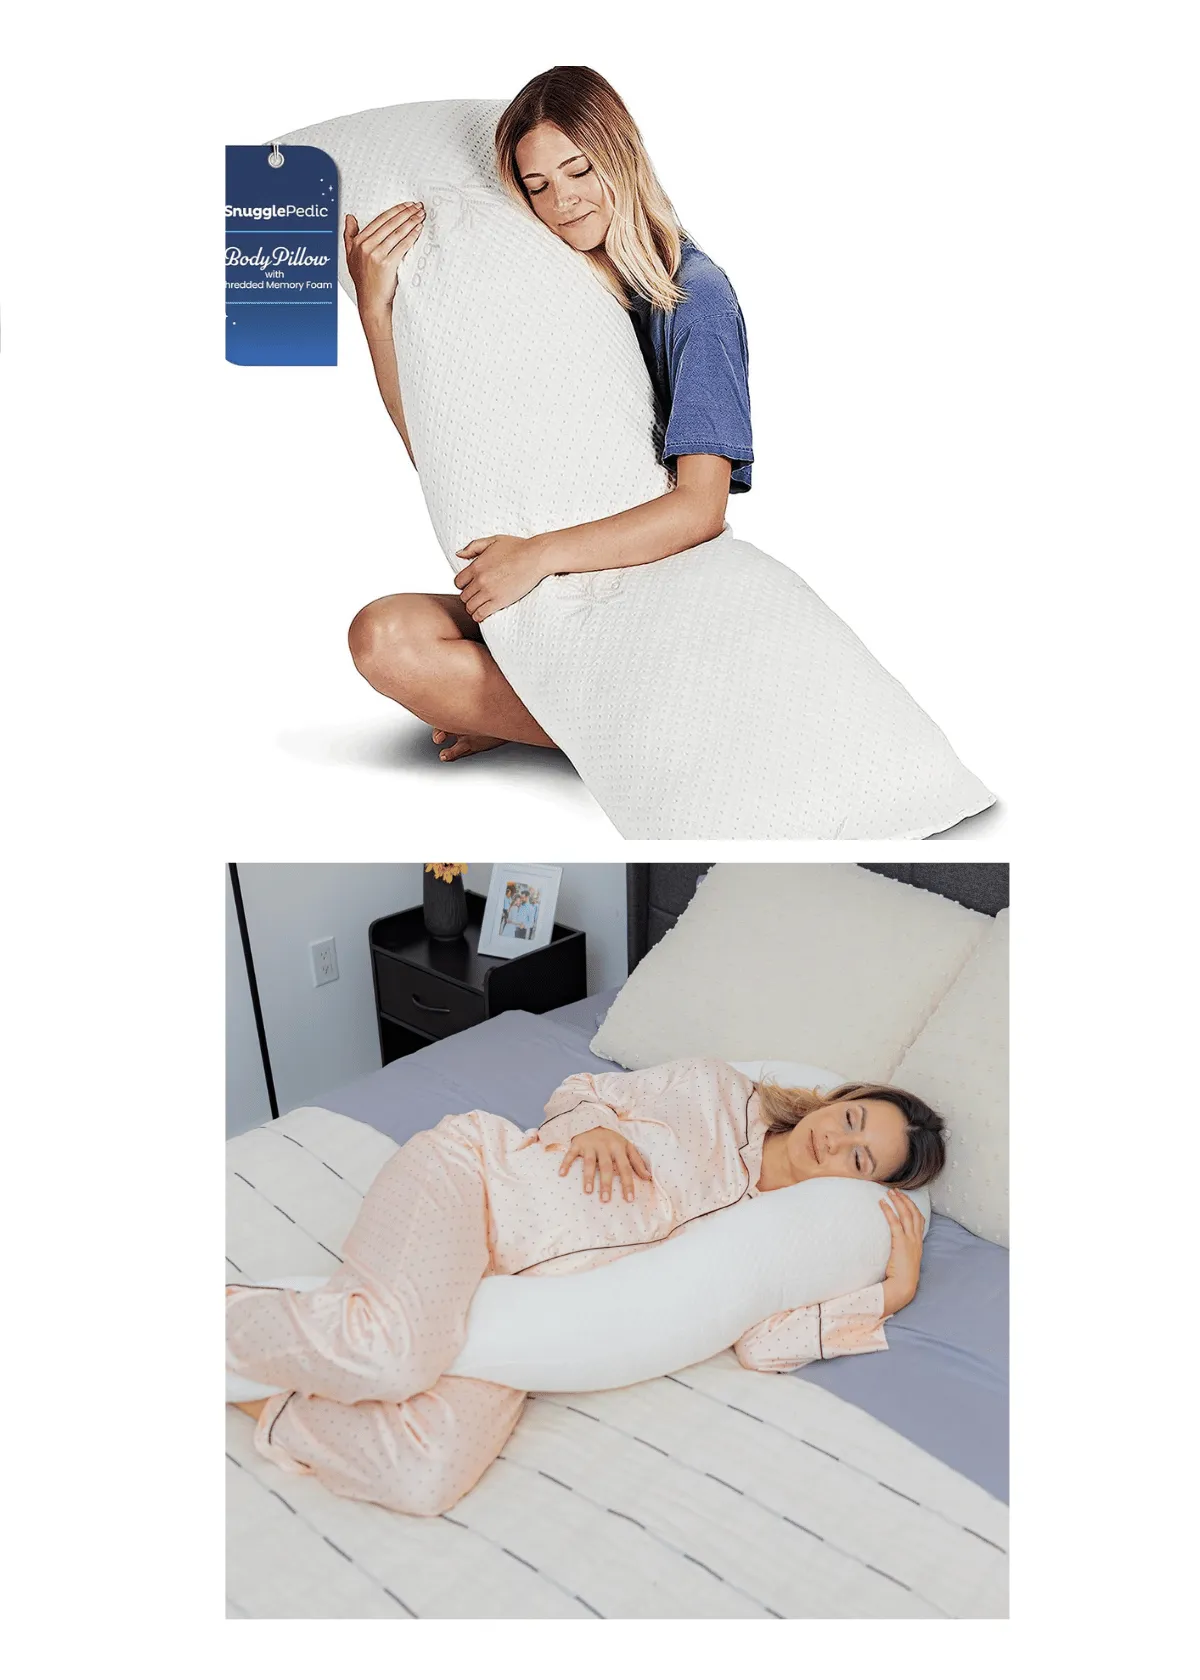 "Best Body Pillow | A Guide For Back Pain, Side Sleepers, and More"